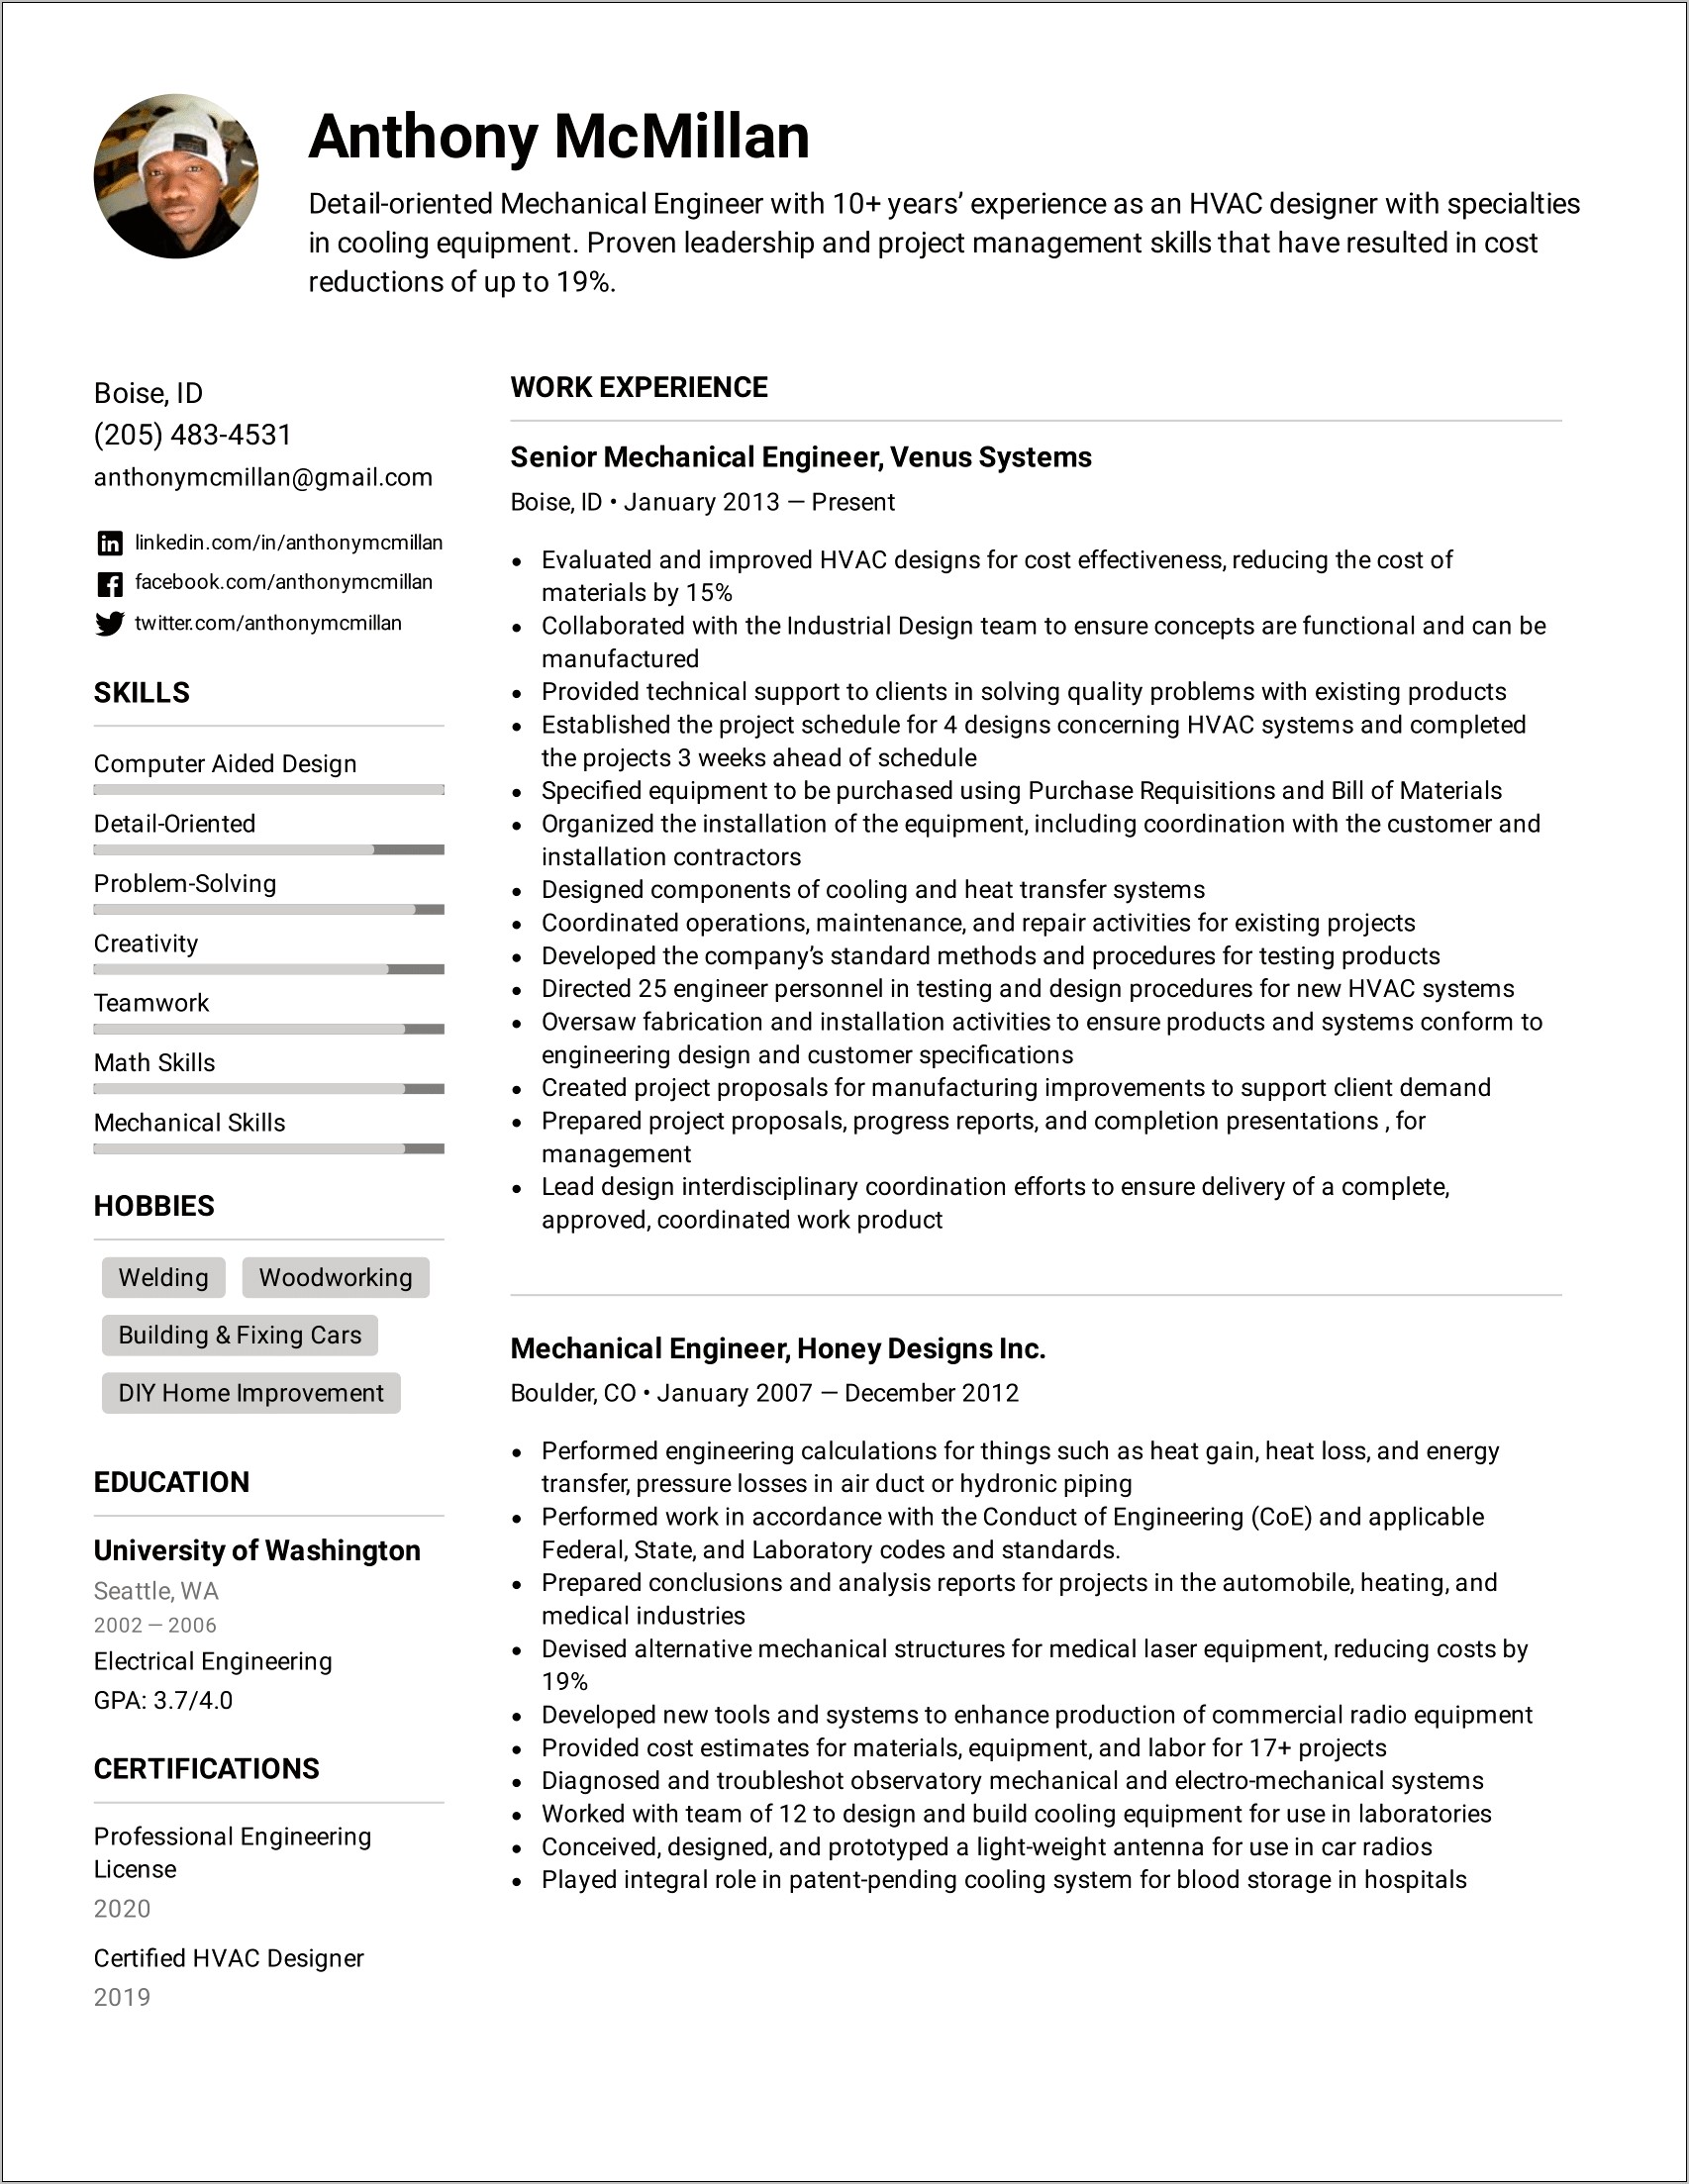 Resume Profile Examples For Engineers